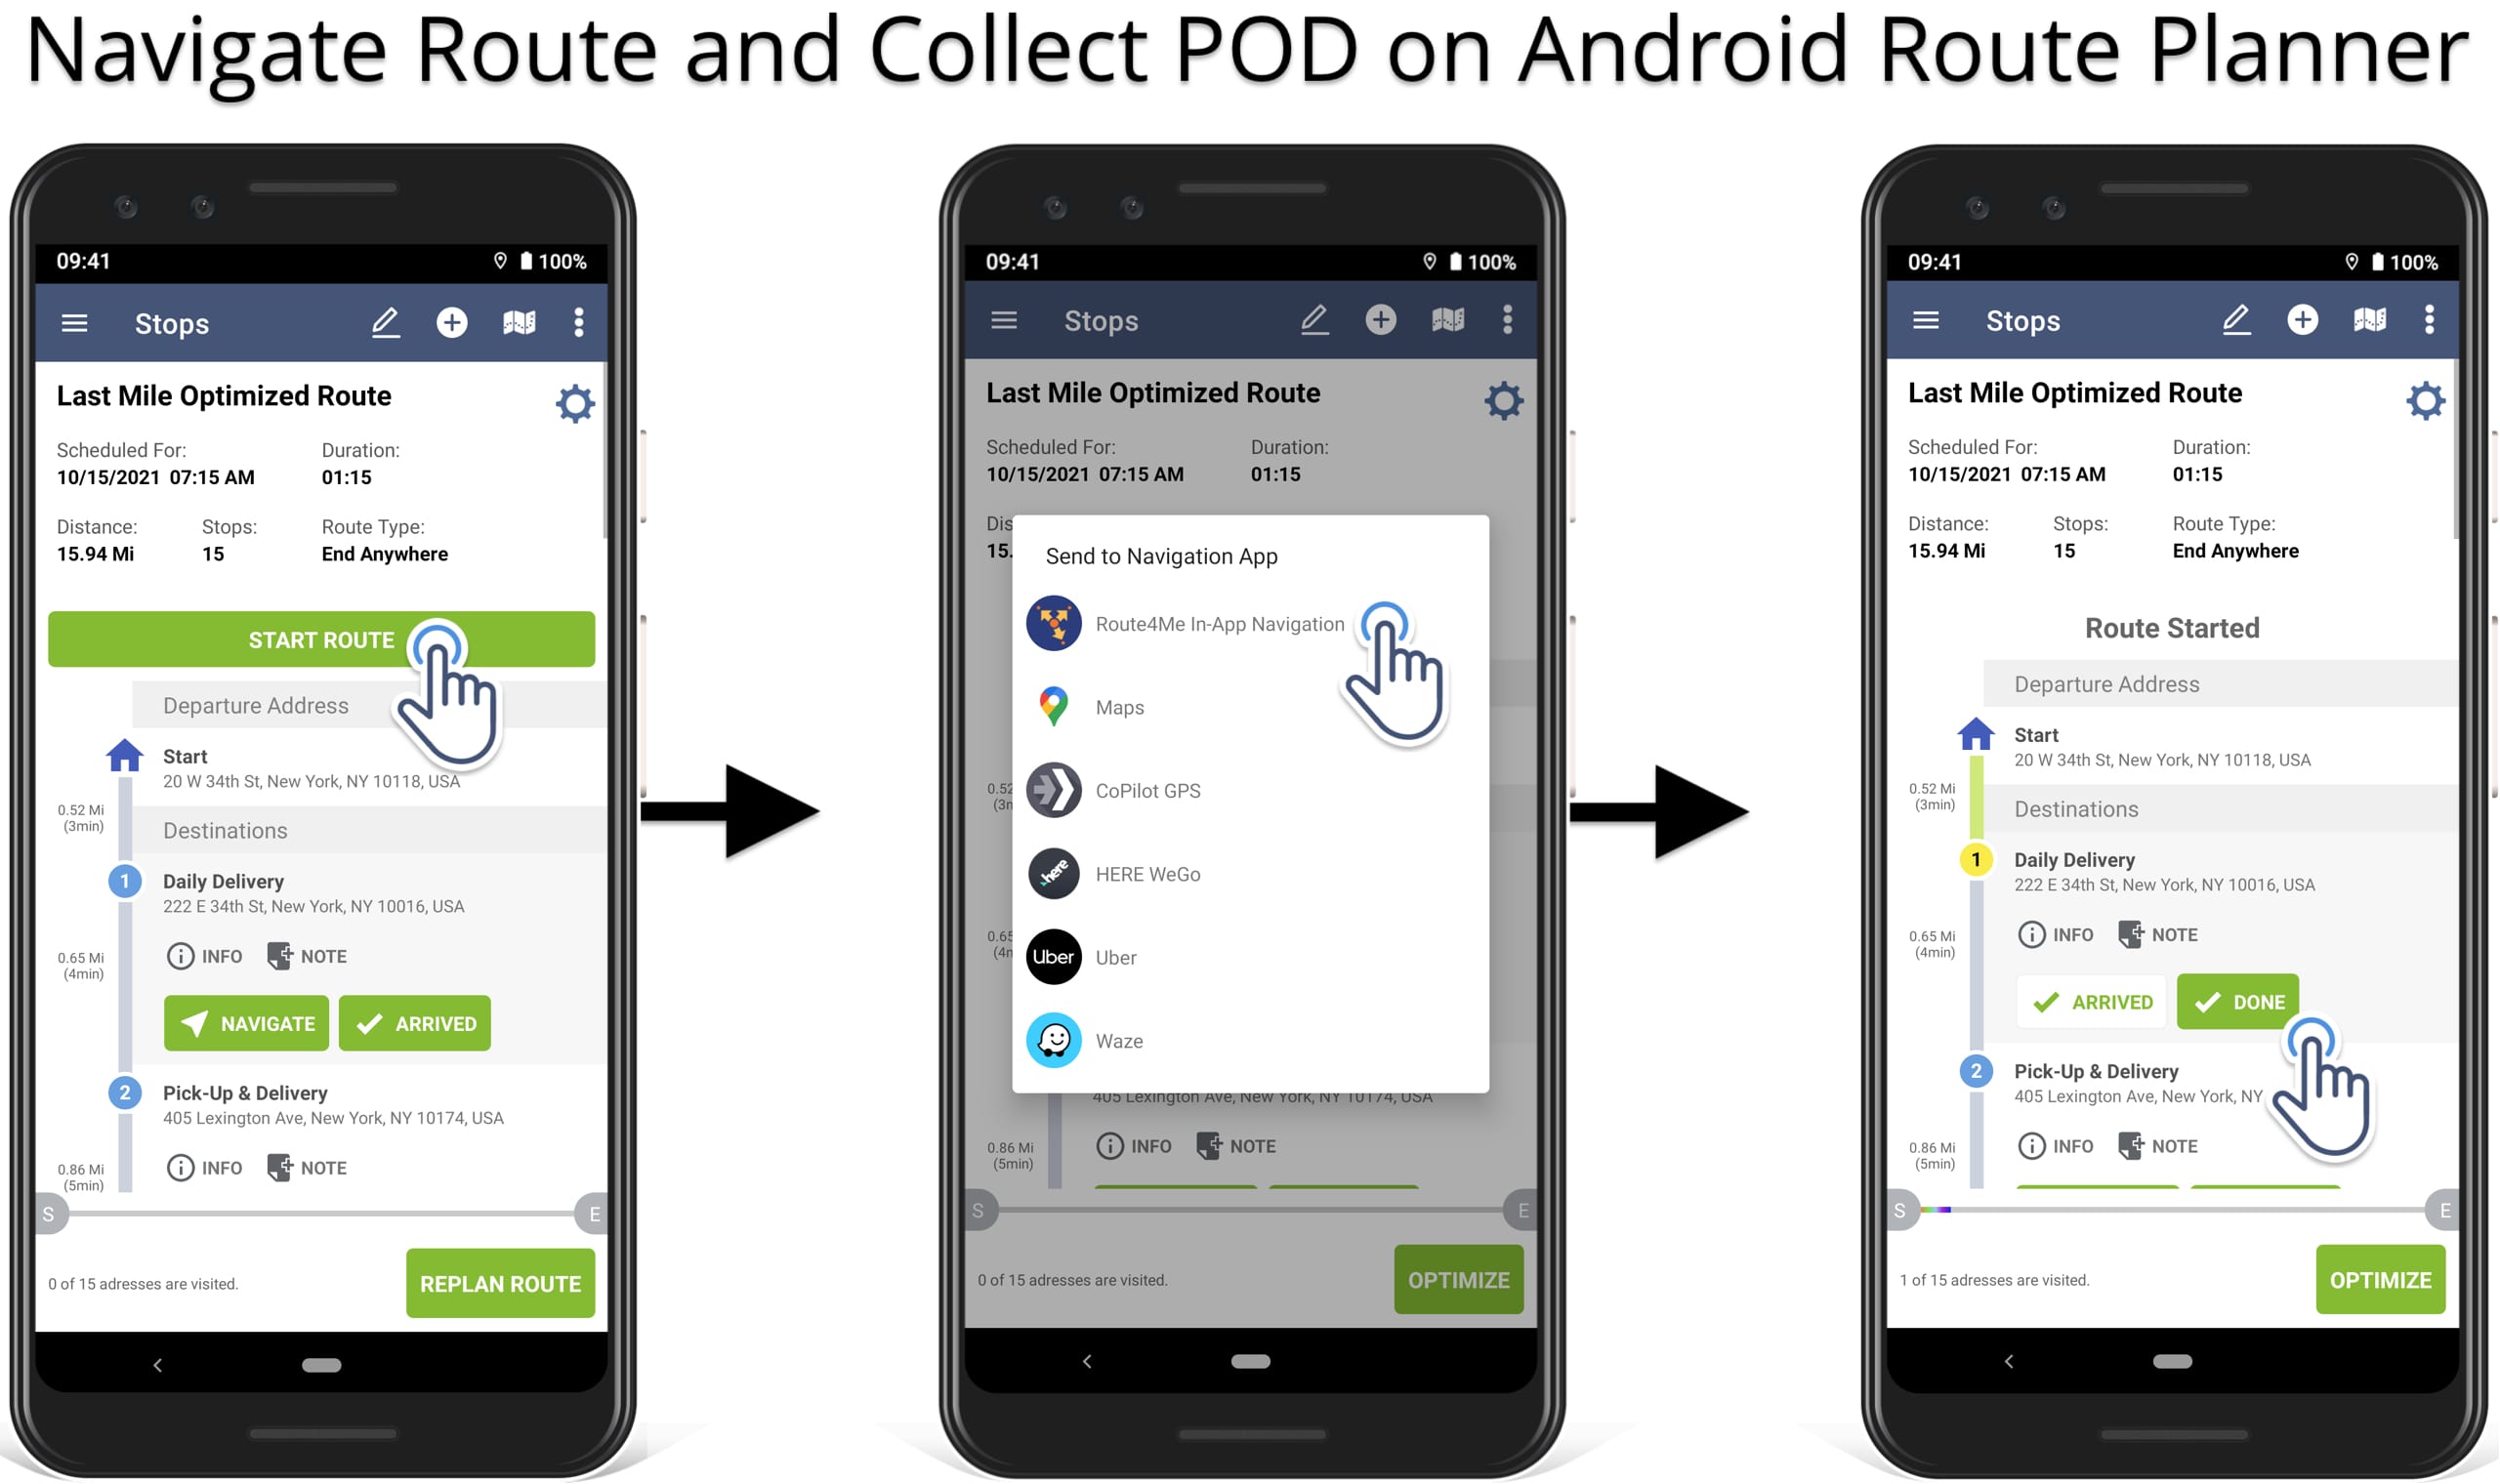 Navigate optimized delivery route with multiple locations and collect POD on route planner.